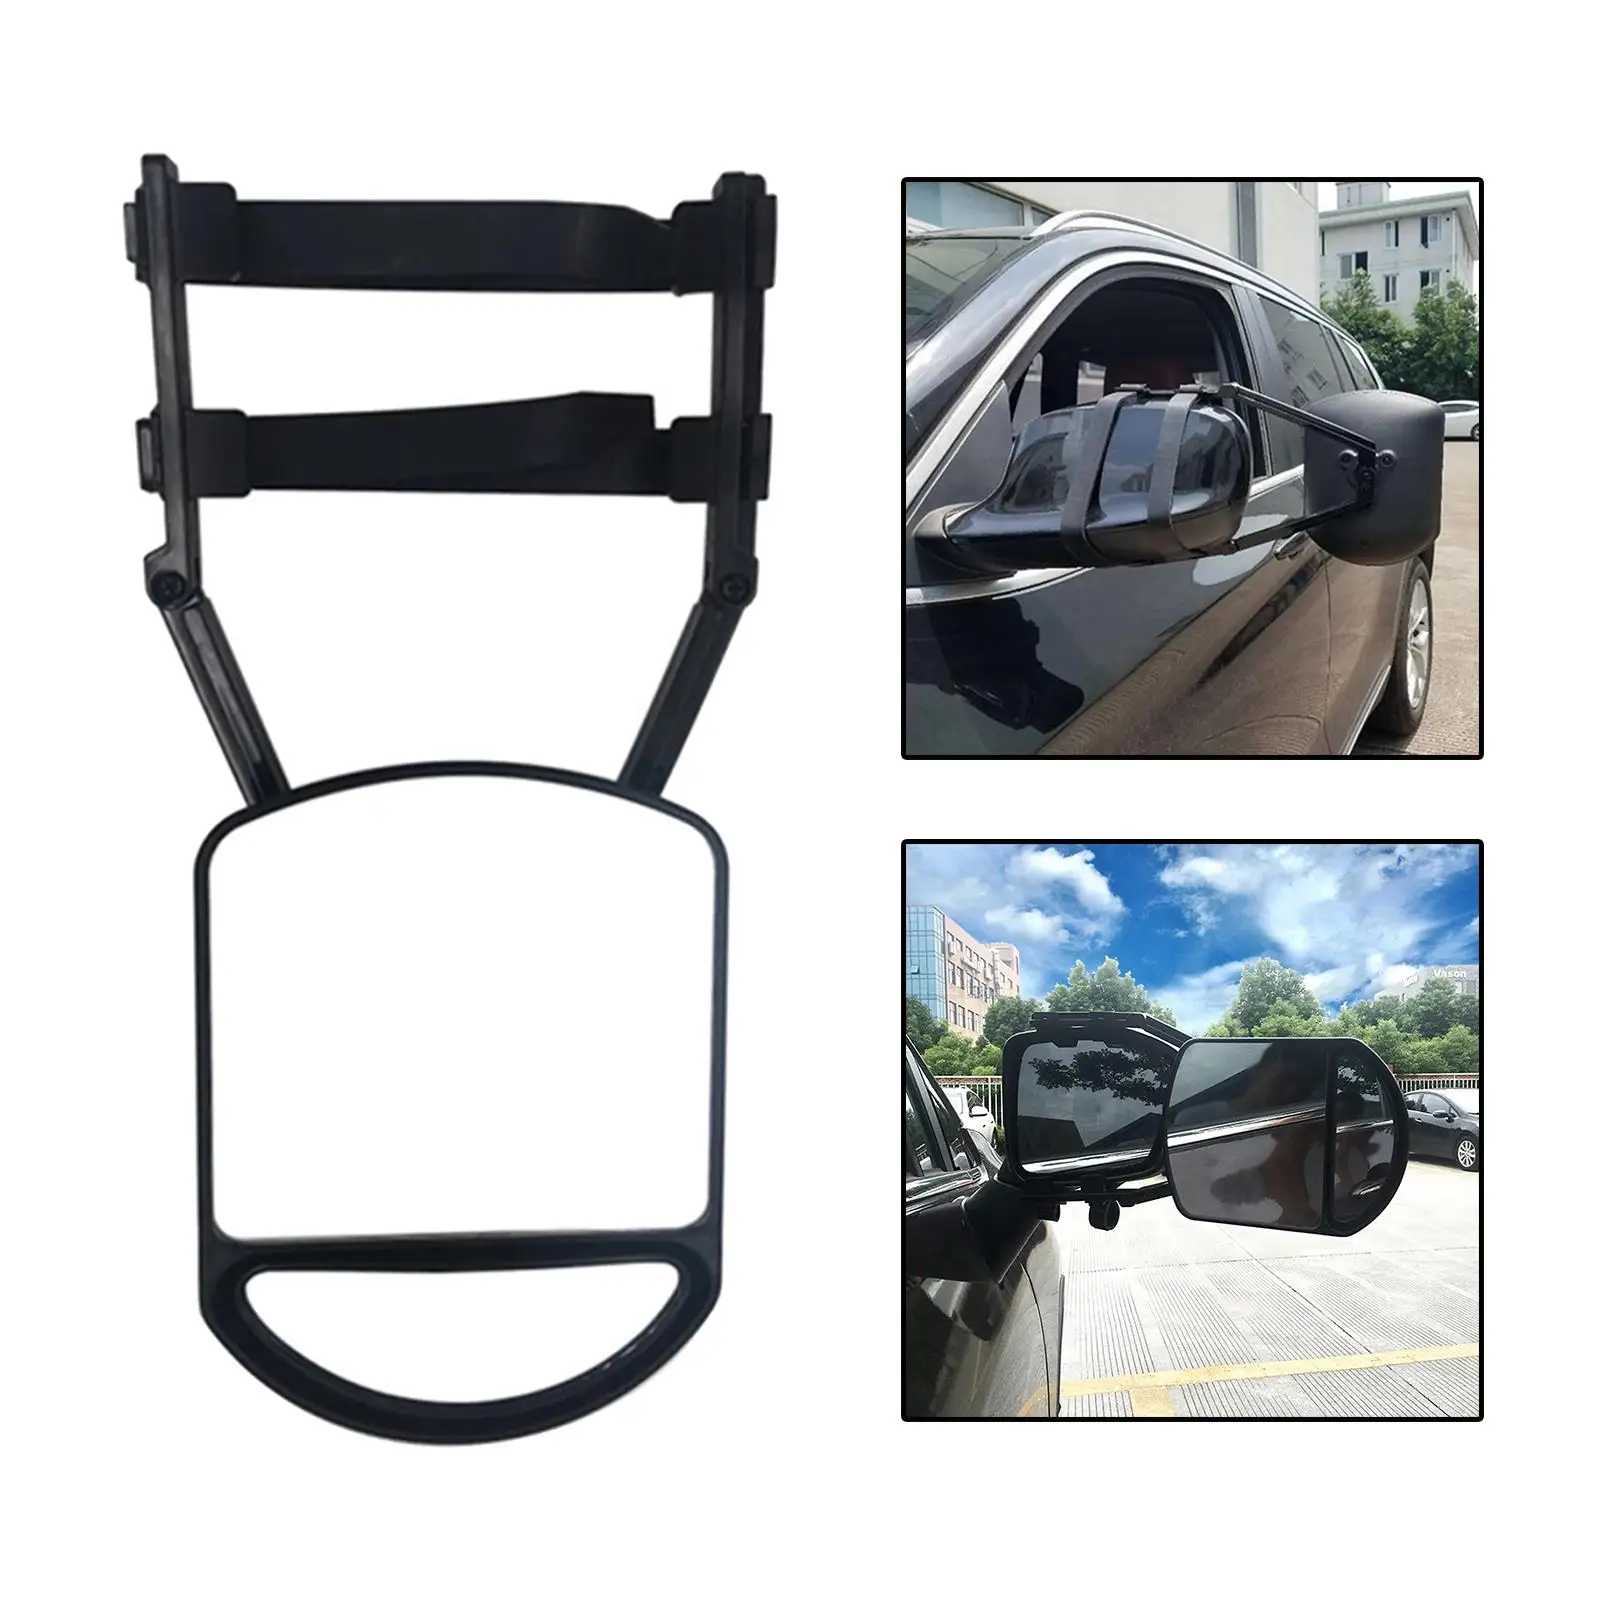 Clamp On Towing Mirror Recreational Increase Visibility 360 Degree Rotation Fit for Auto Vehicle